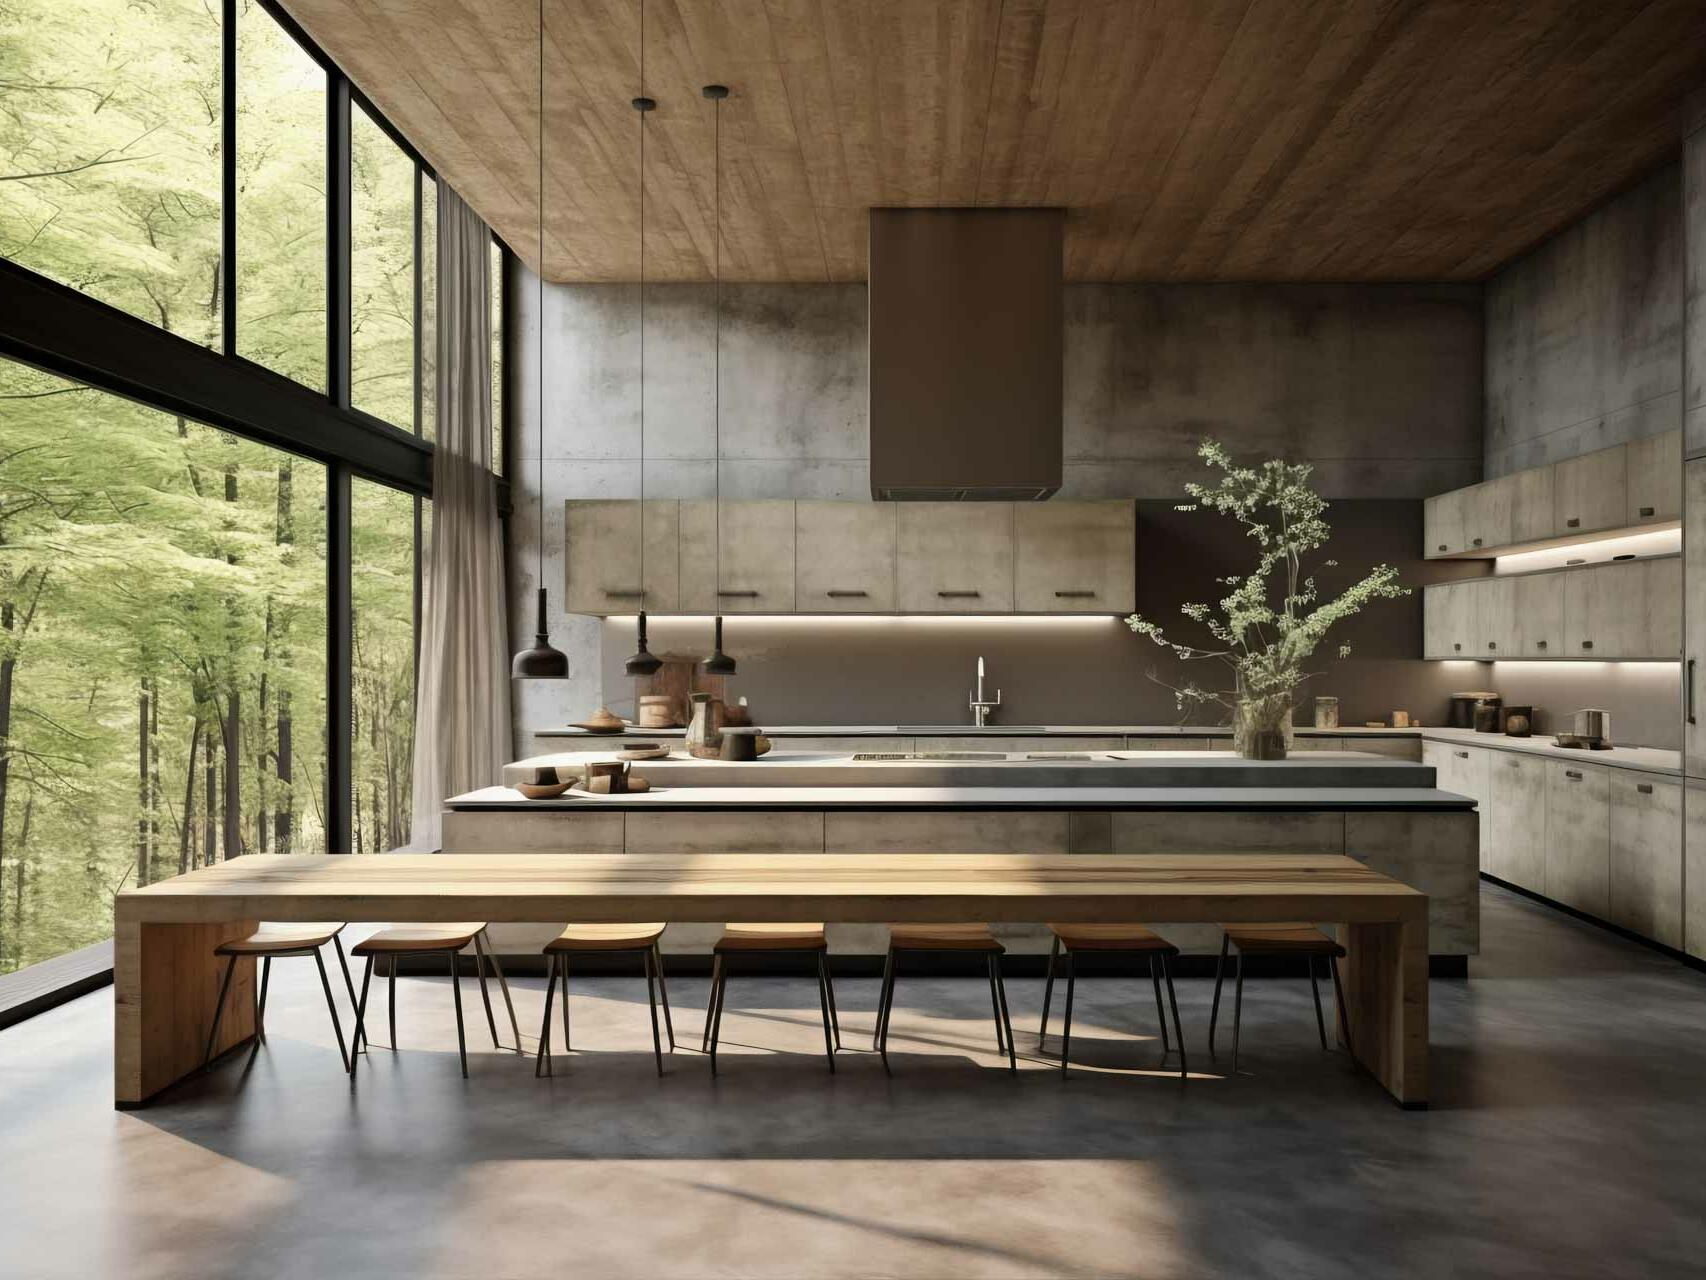 Dassbach, Buy a kitchen, factory outlet, design kitchens, country kitchens, modern kitchens, handleless kitchens, classic kitchens